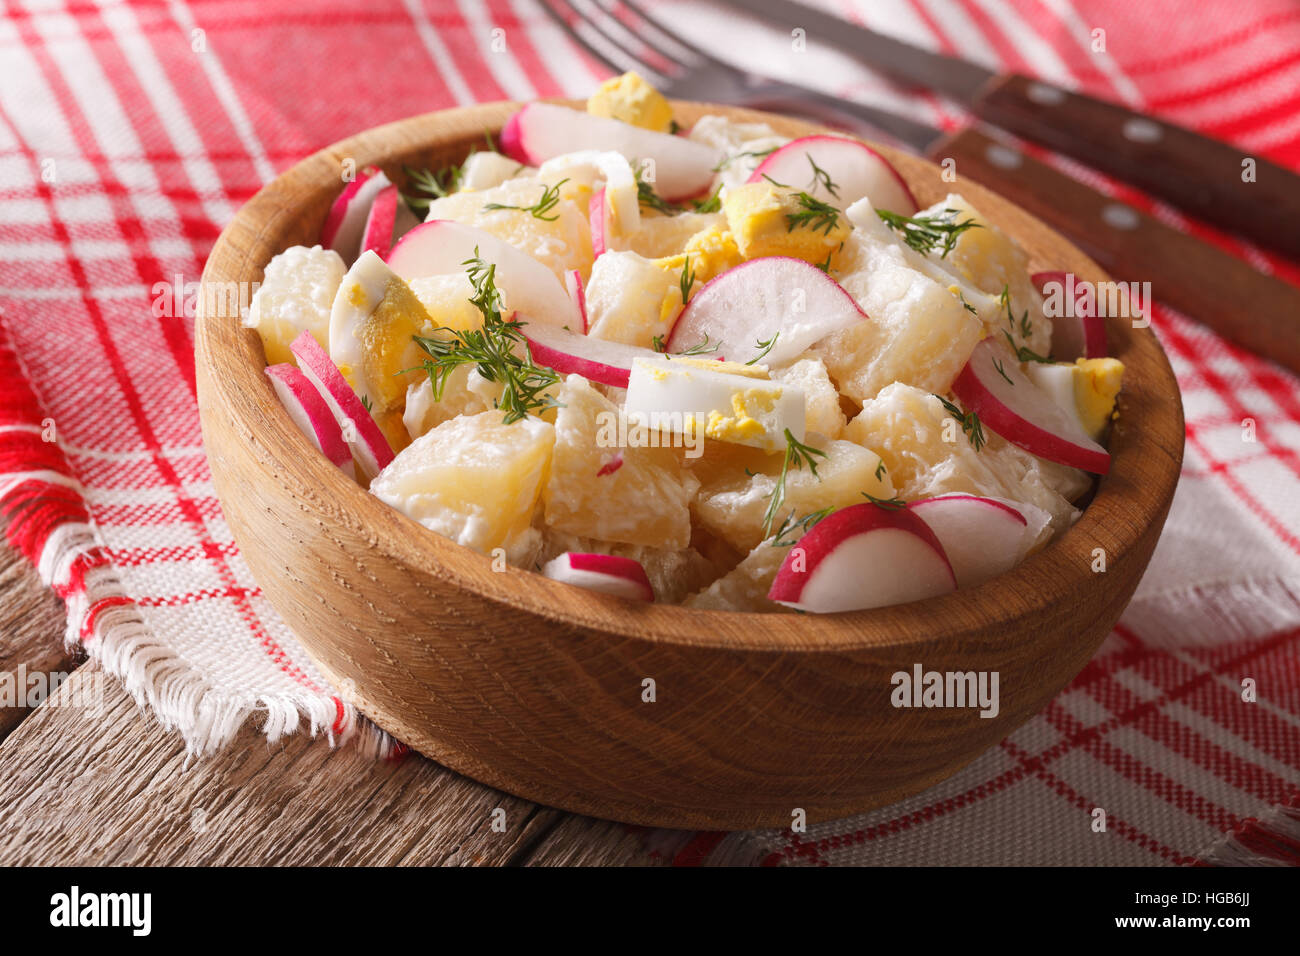 Homemade potato salad with radish and eggs close-up in a bowl on the table. horizontal Stock Photo